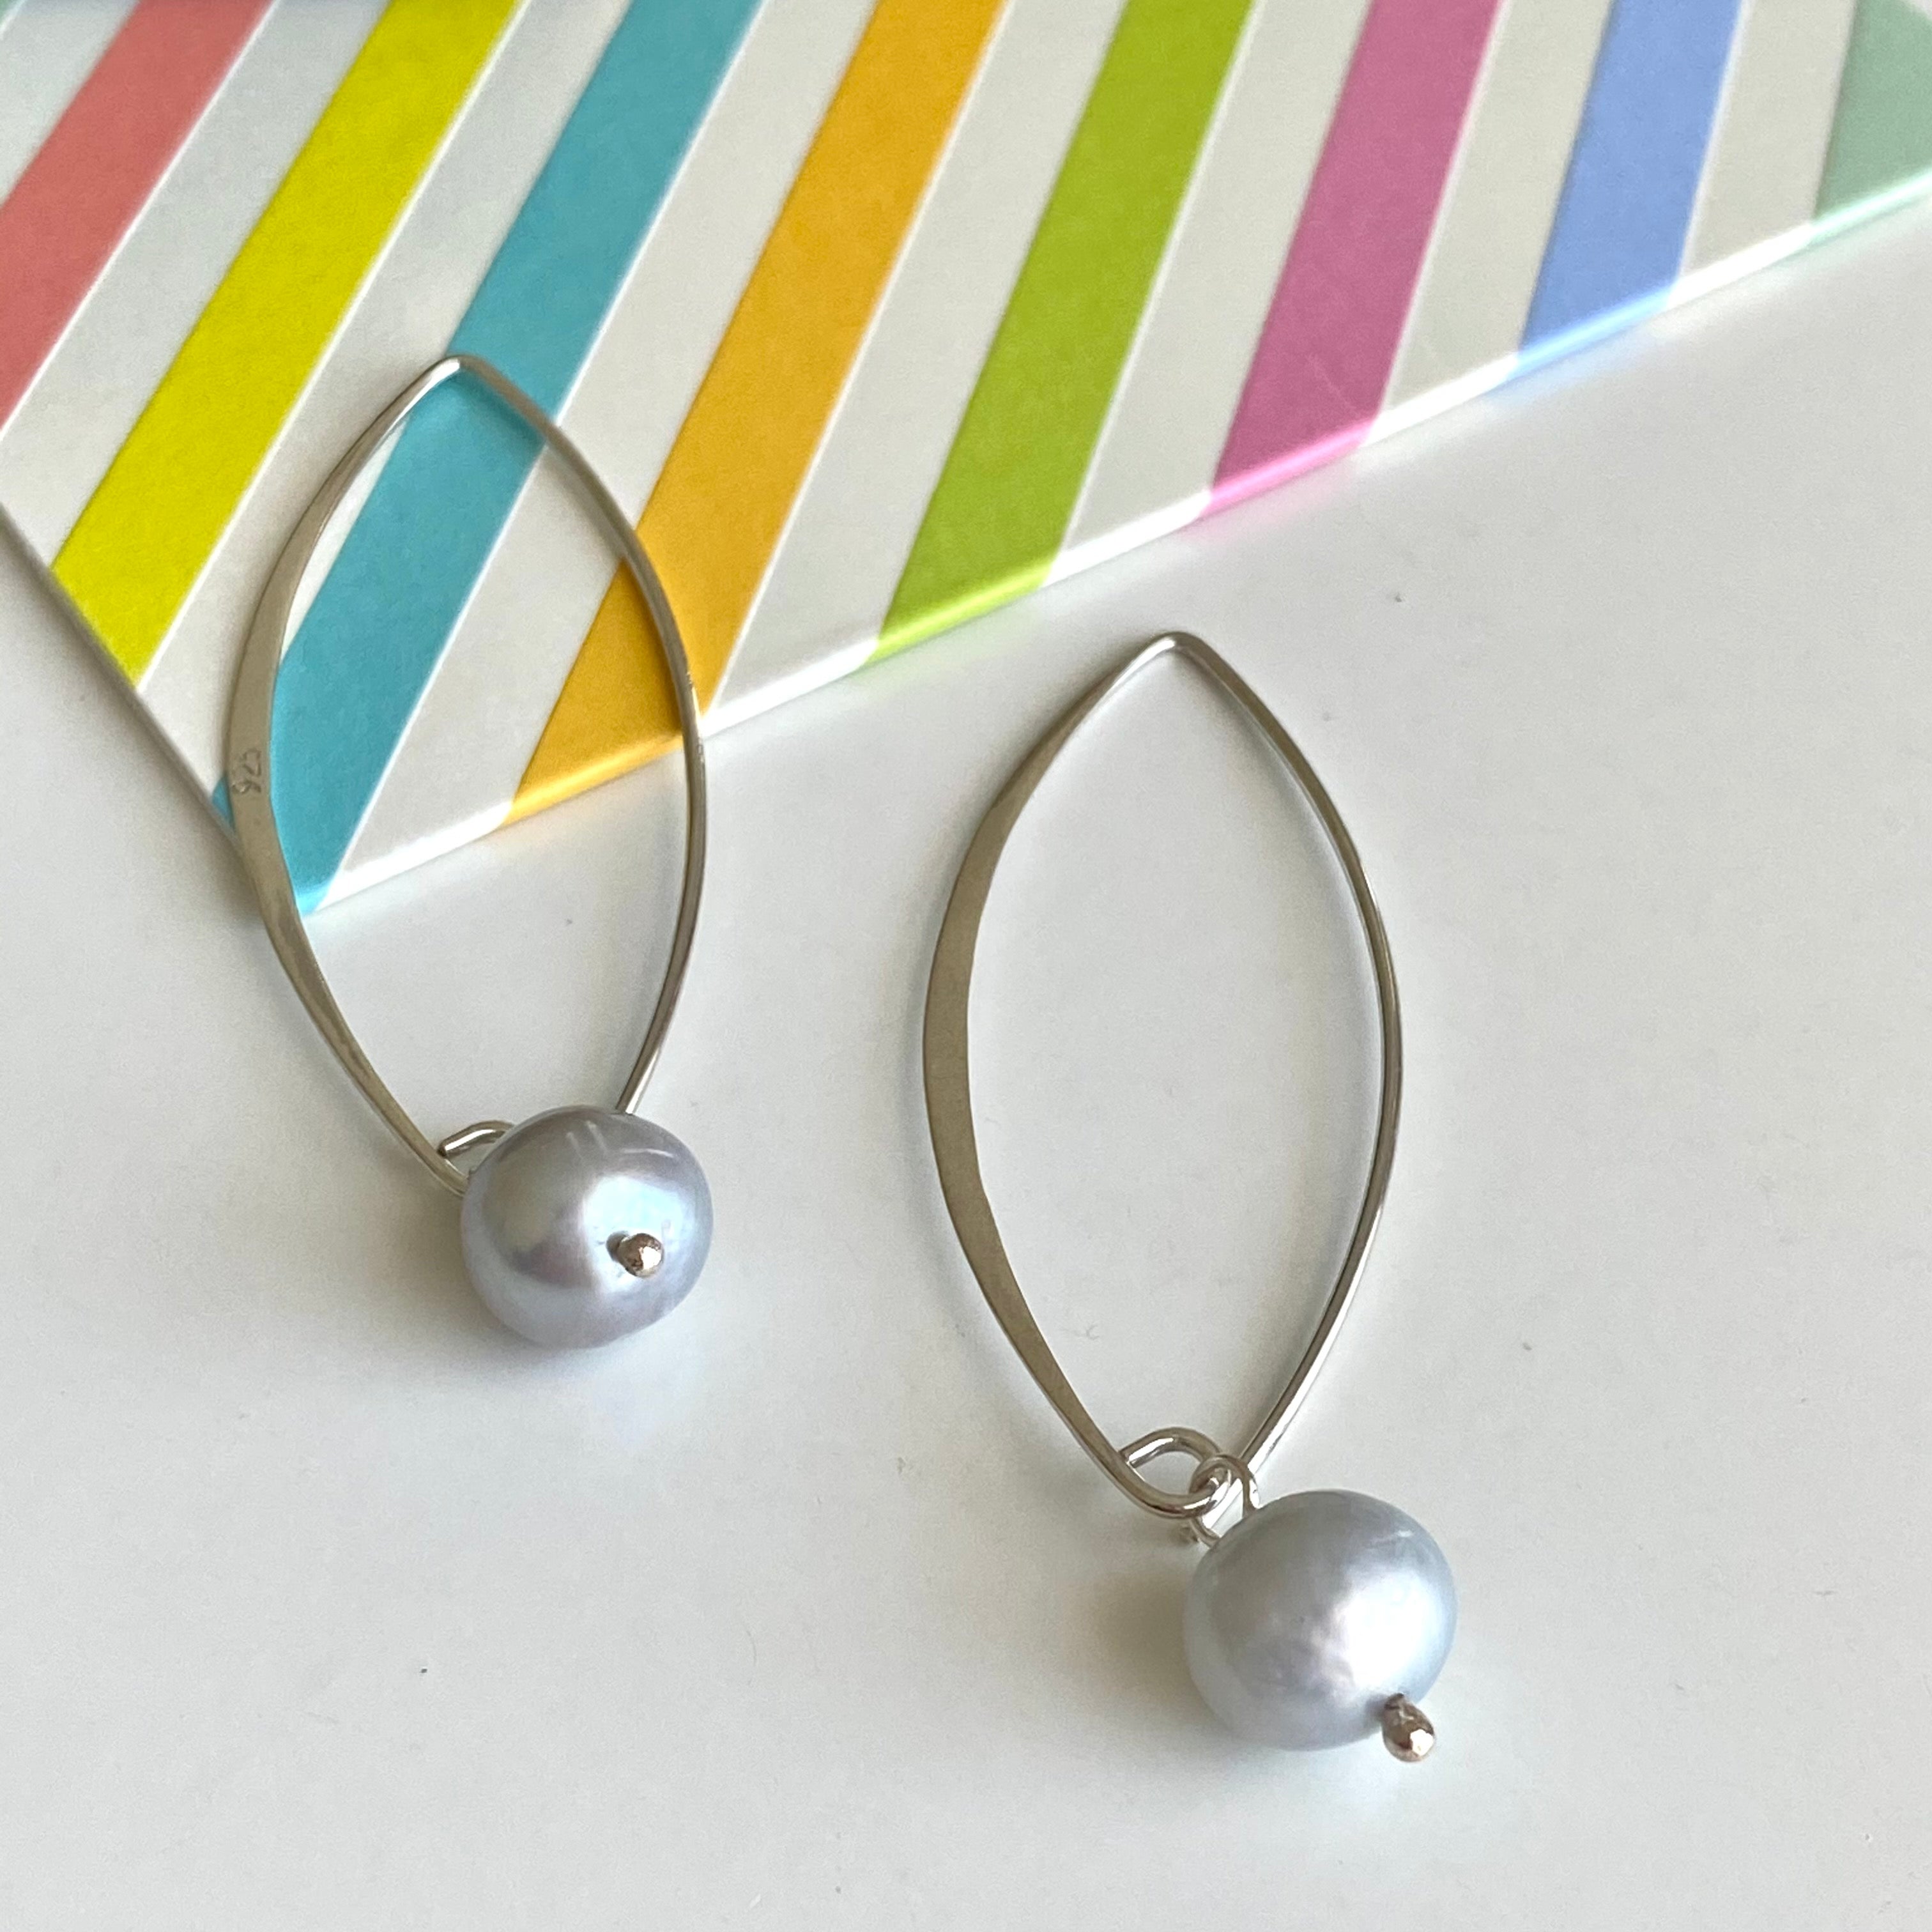 Long Sterling Silver Threader Earrings with Grey Pearl Drop